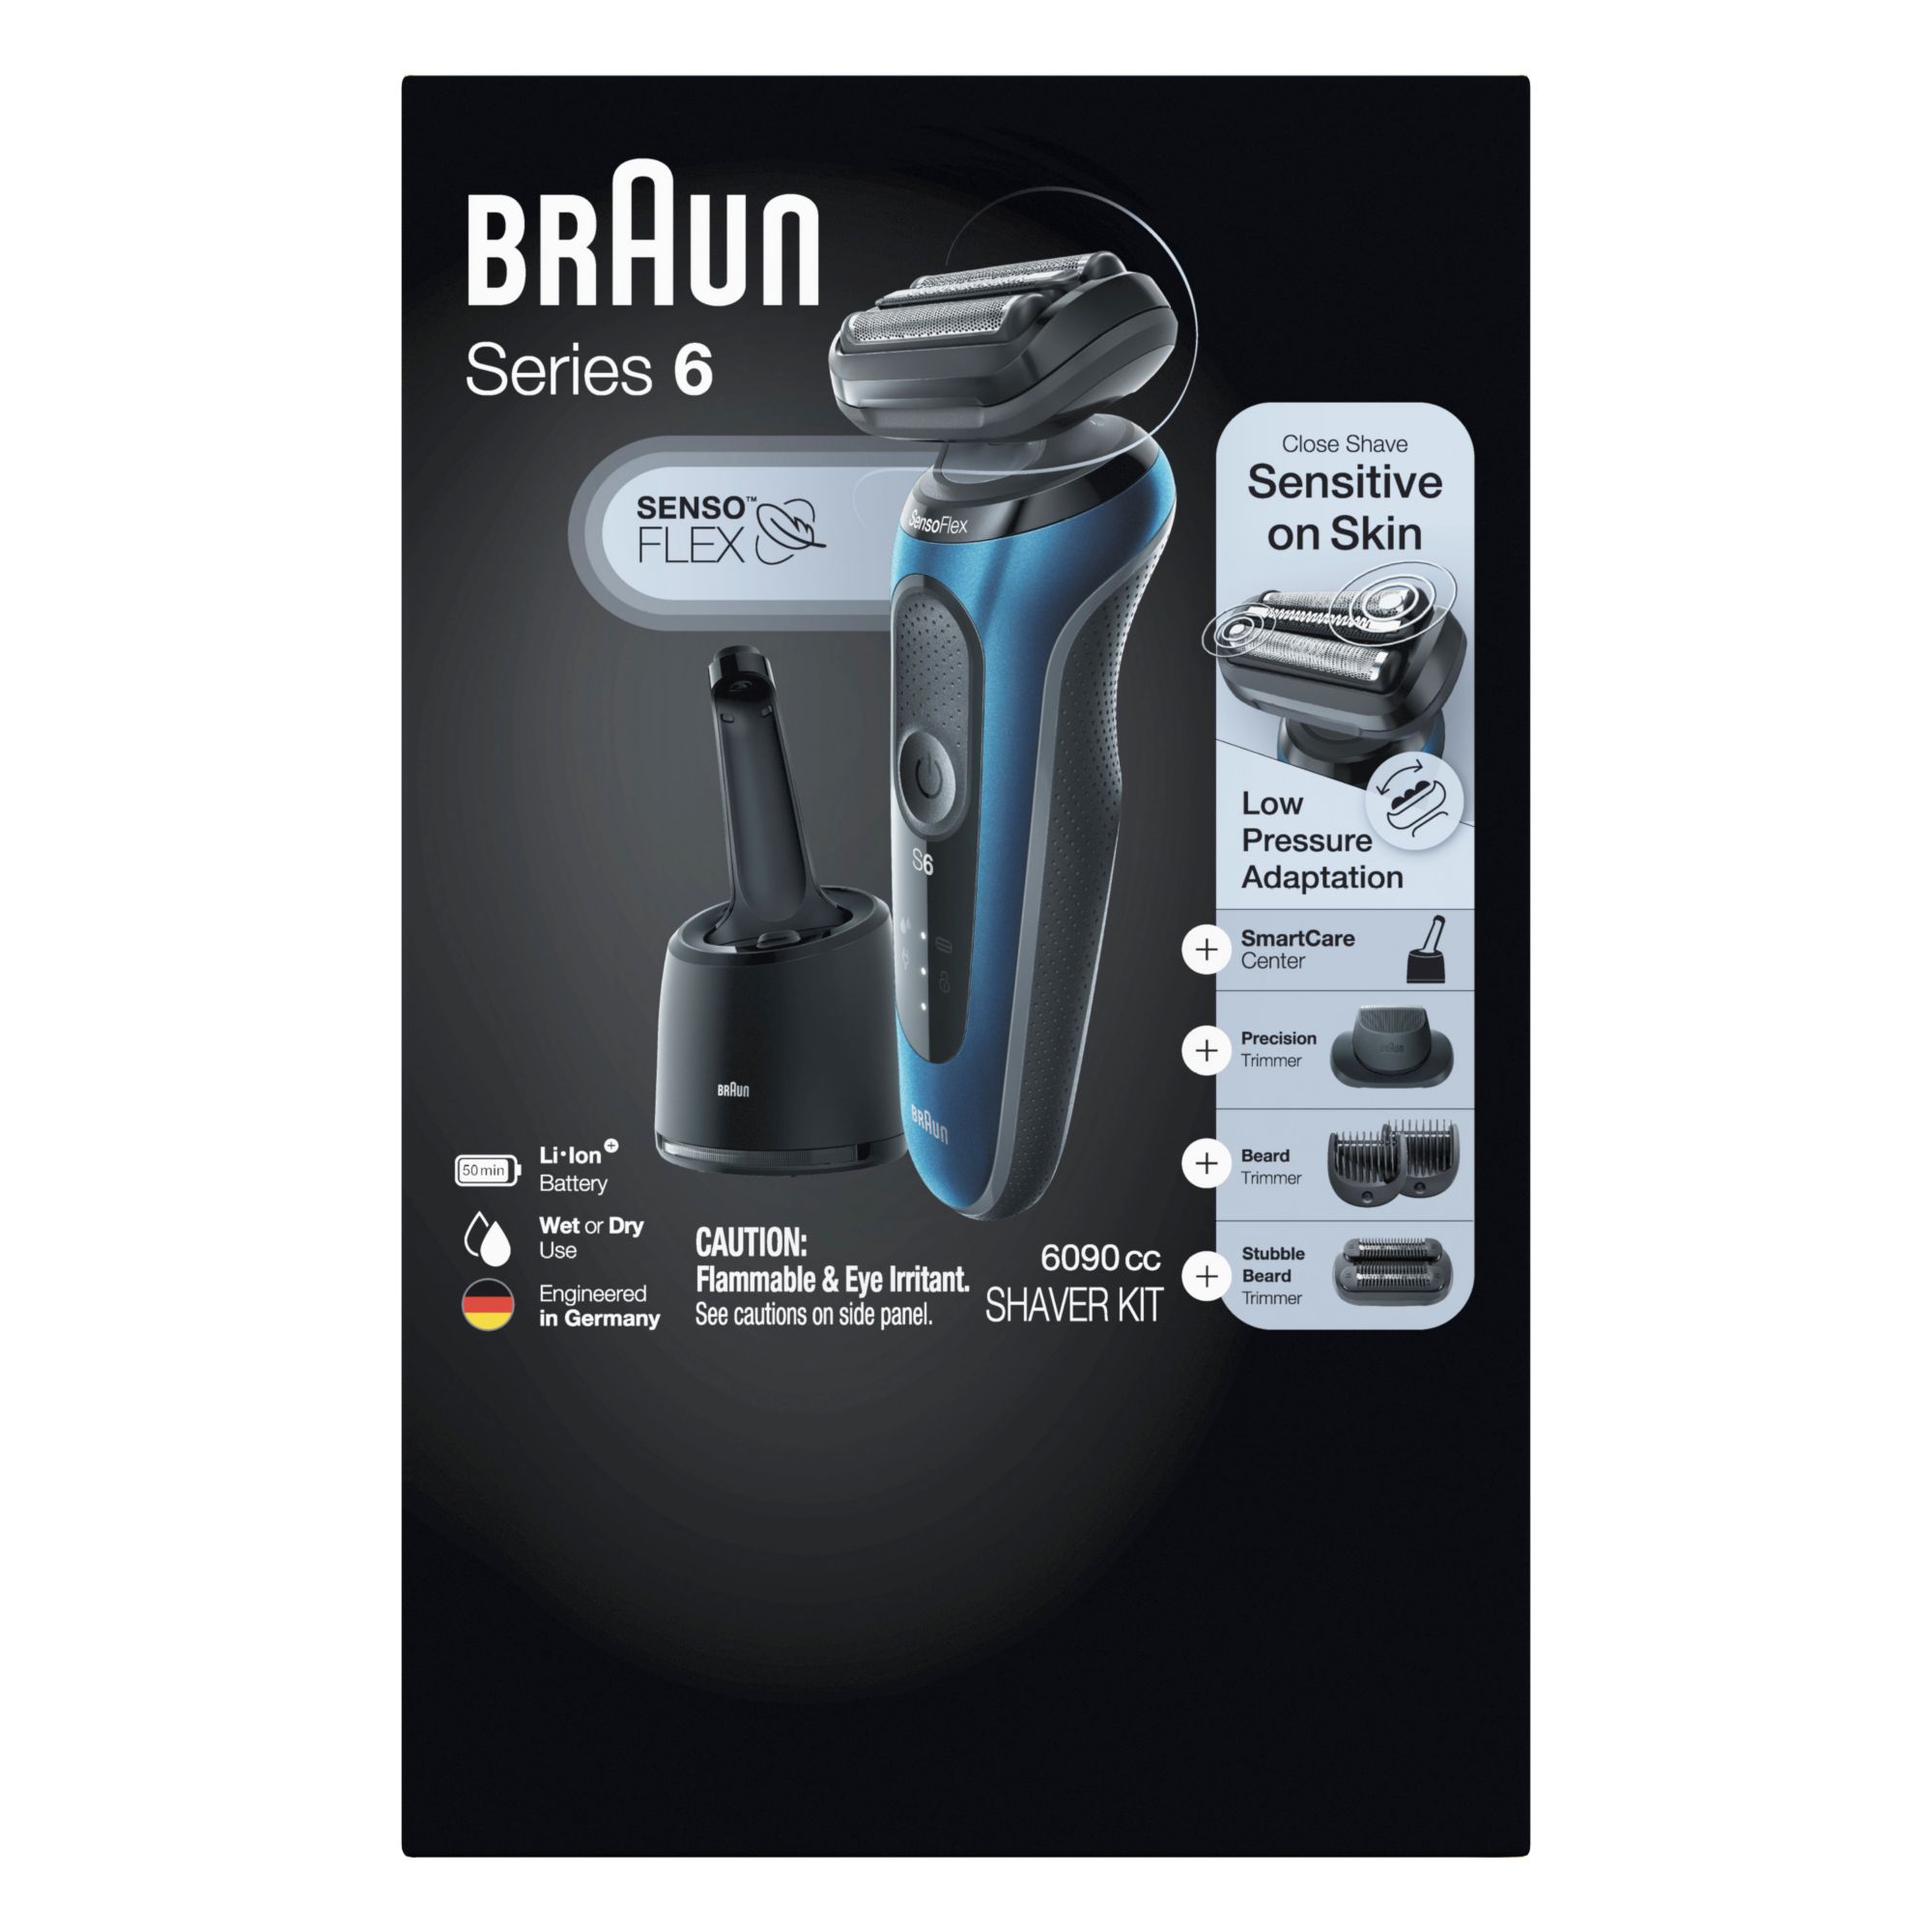 rechargeable electric razor with trimmer